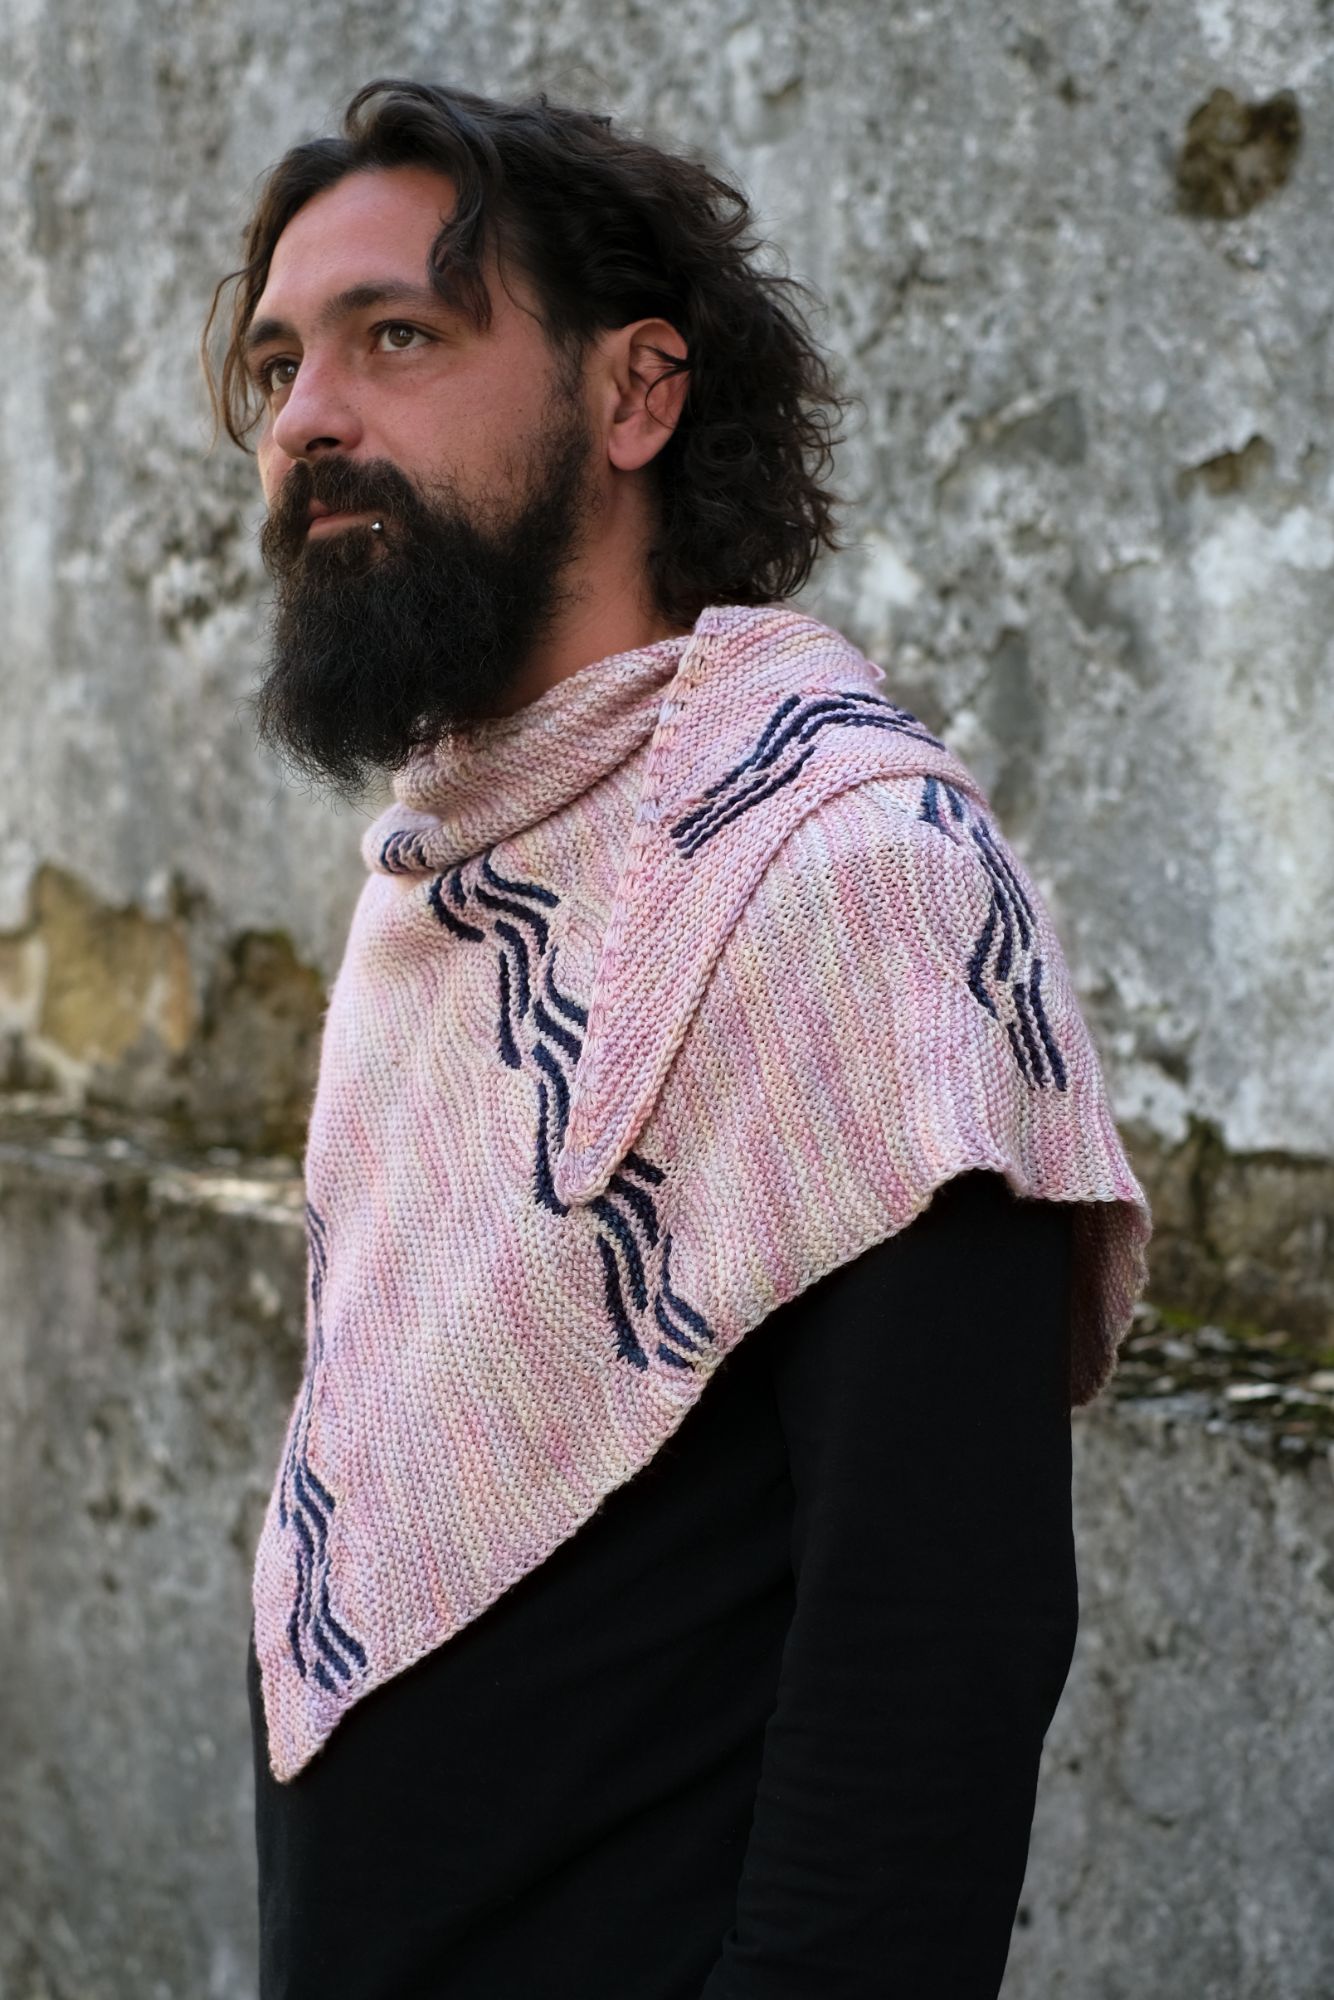 white person with a beard and lip ring, faces to the side and out wearing a pink shawk over their shoulders with blue short row motifs 